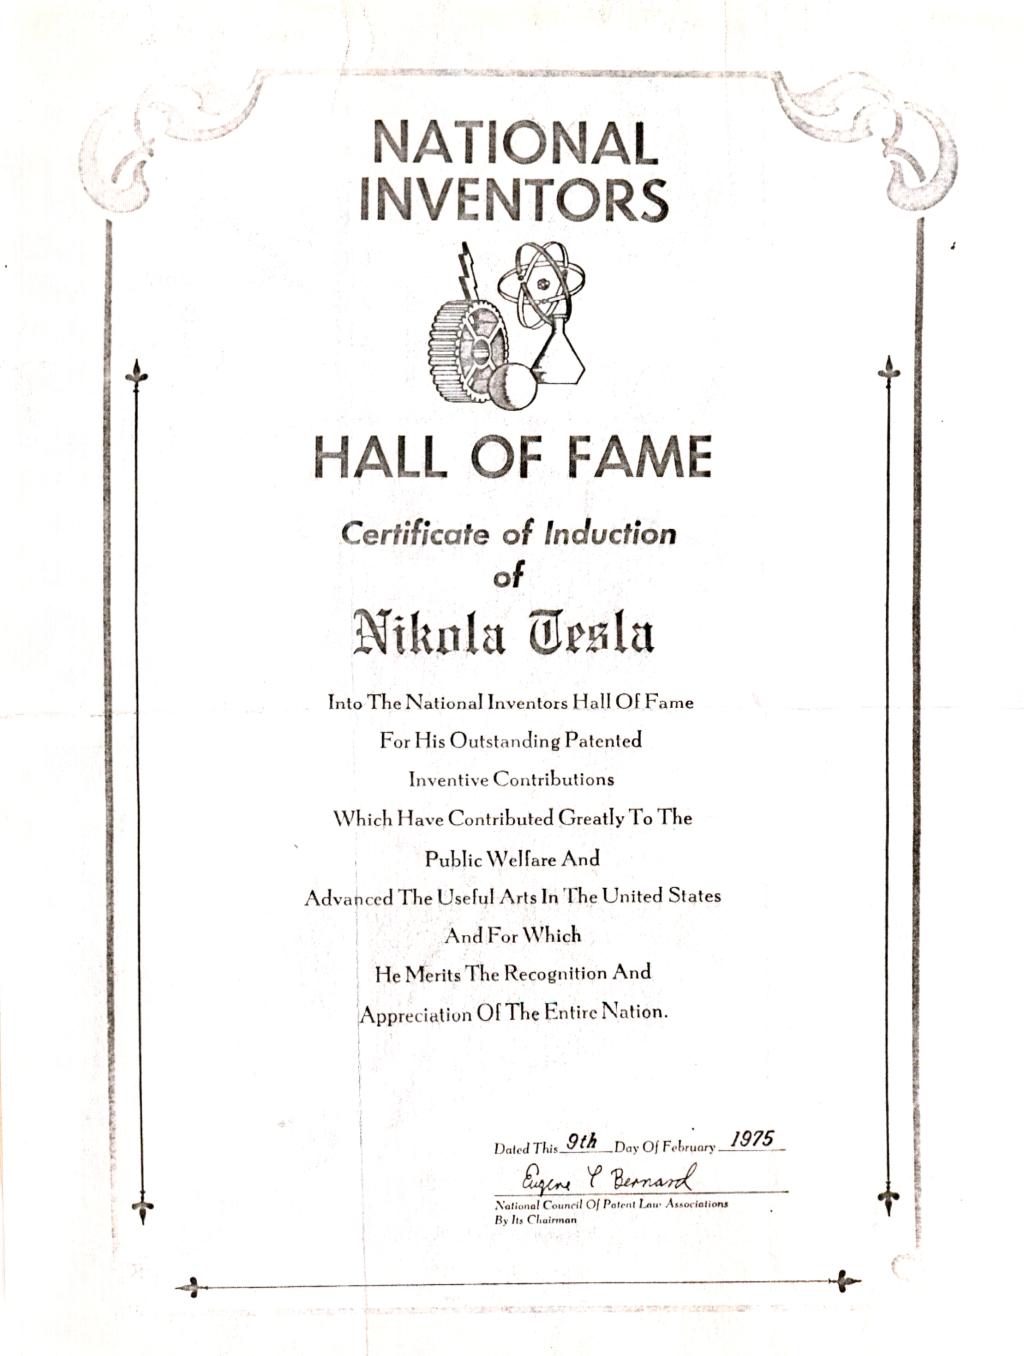 Nikola Tesla's Certificate of Induction Into the Inventors Hall of Fame